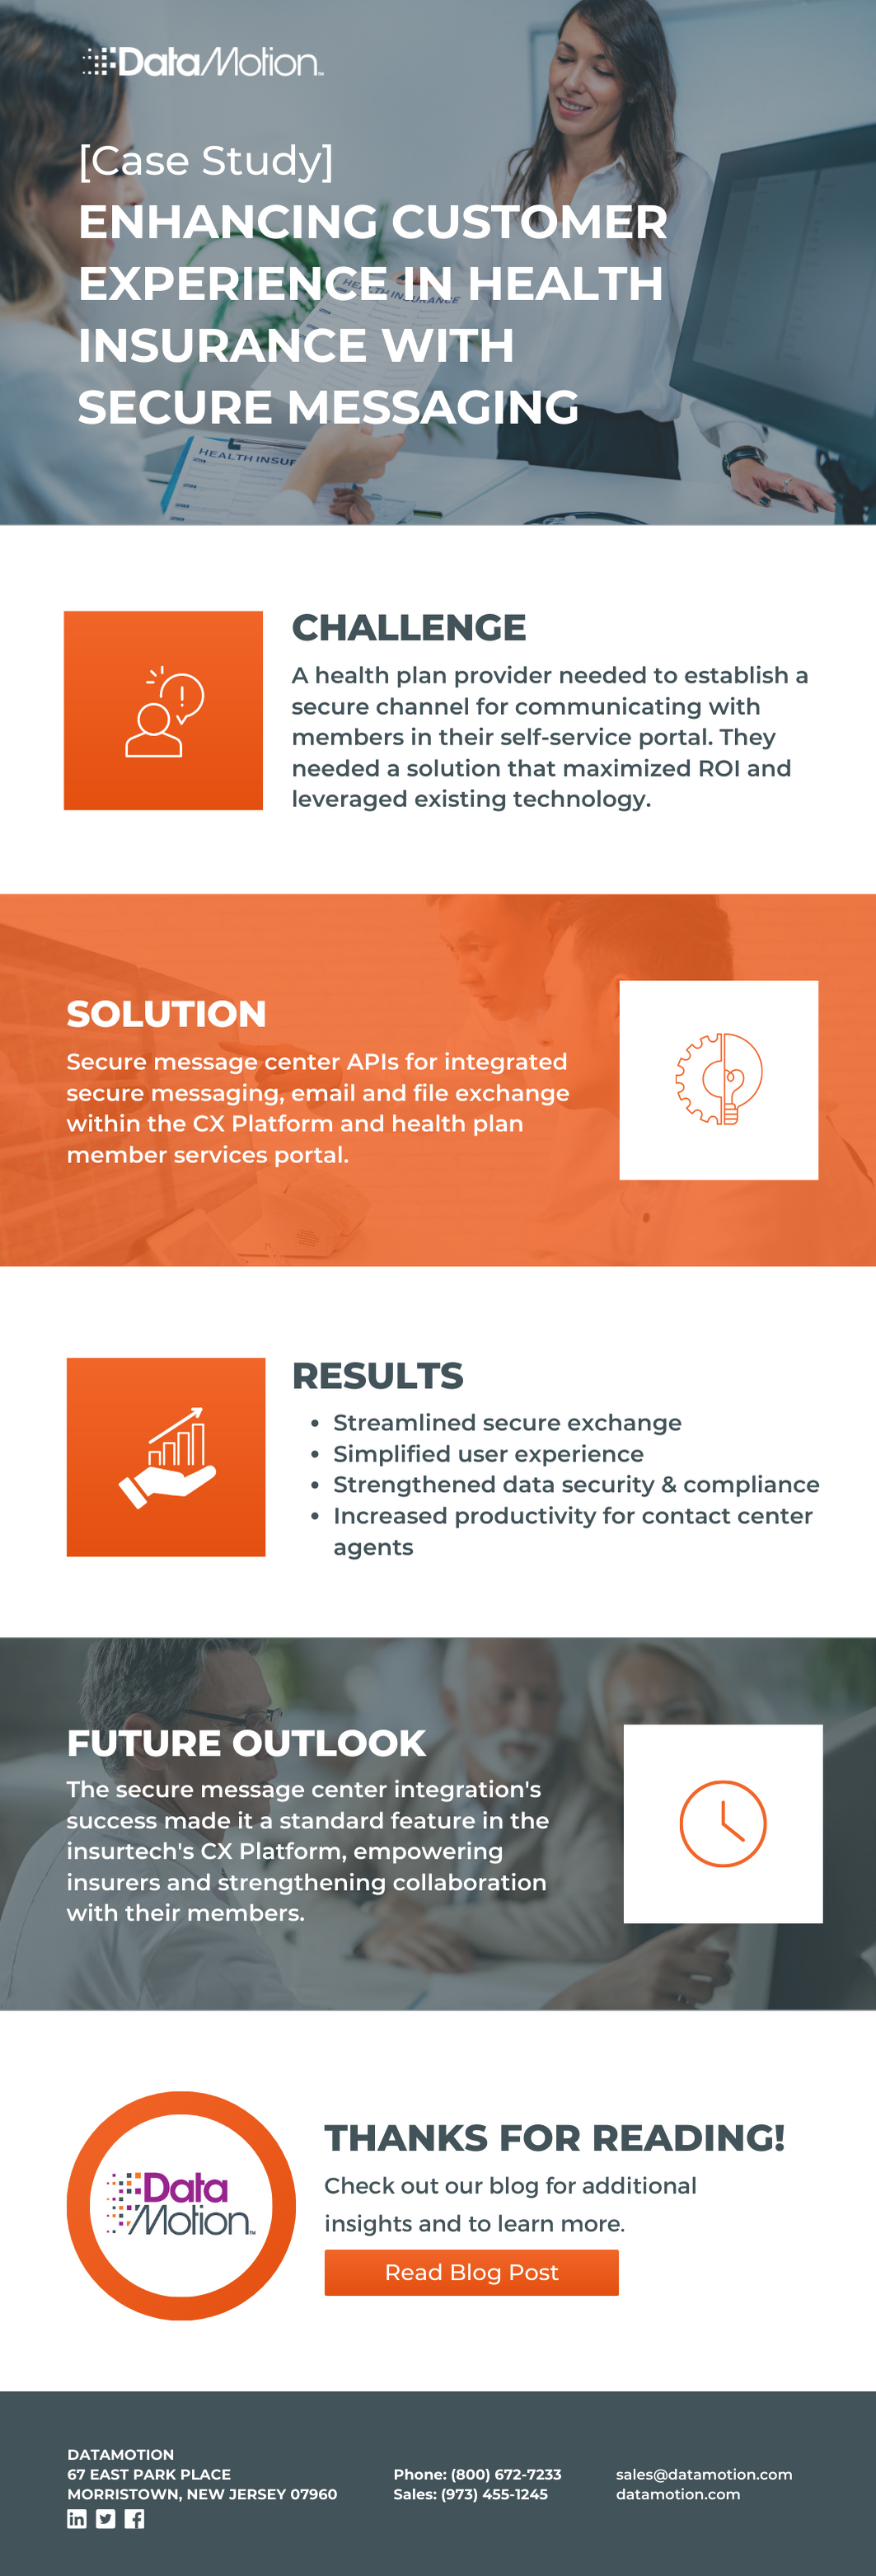 Infographic for case study enhancing customer experience in health insurance with secure messaging